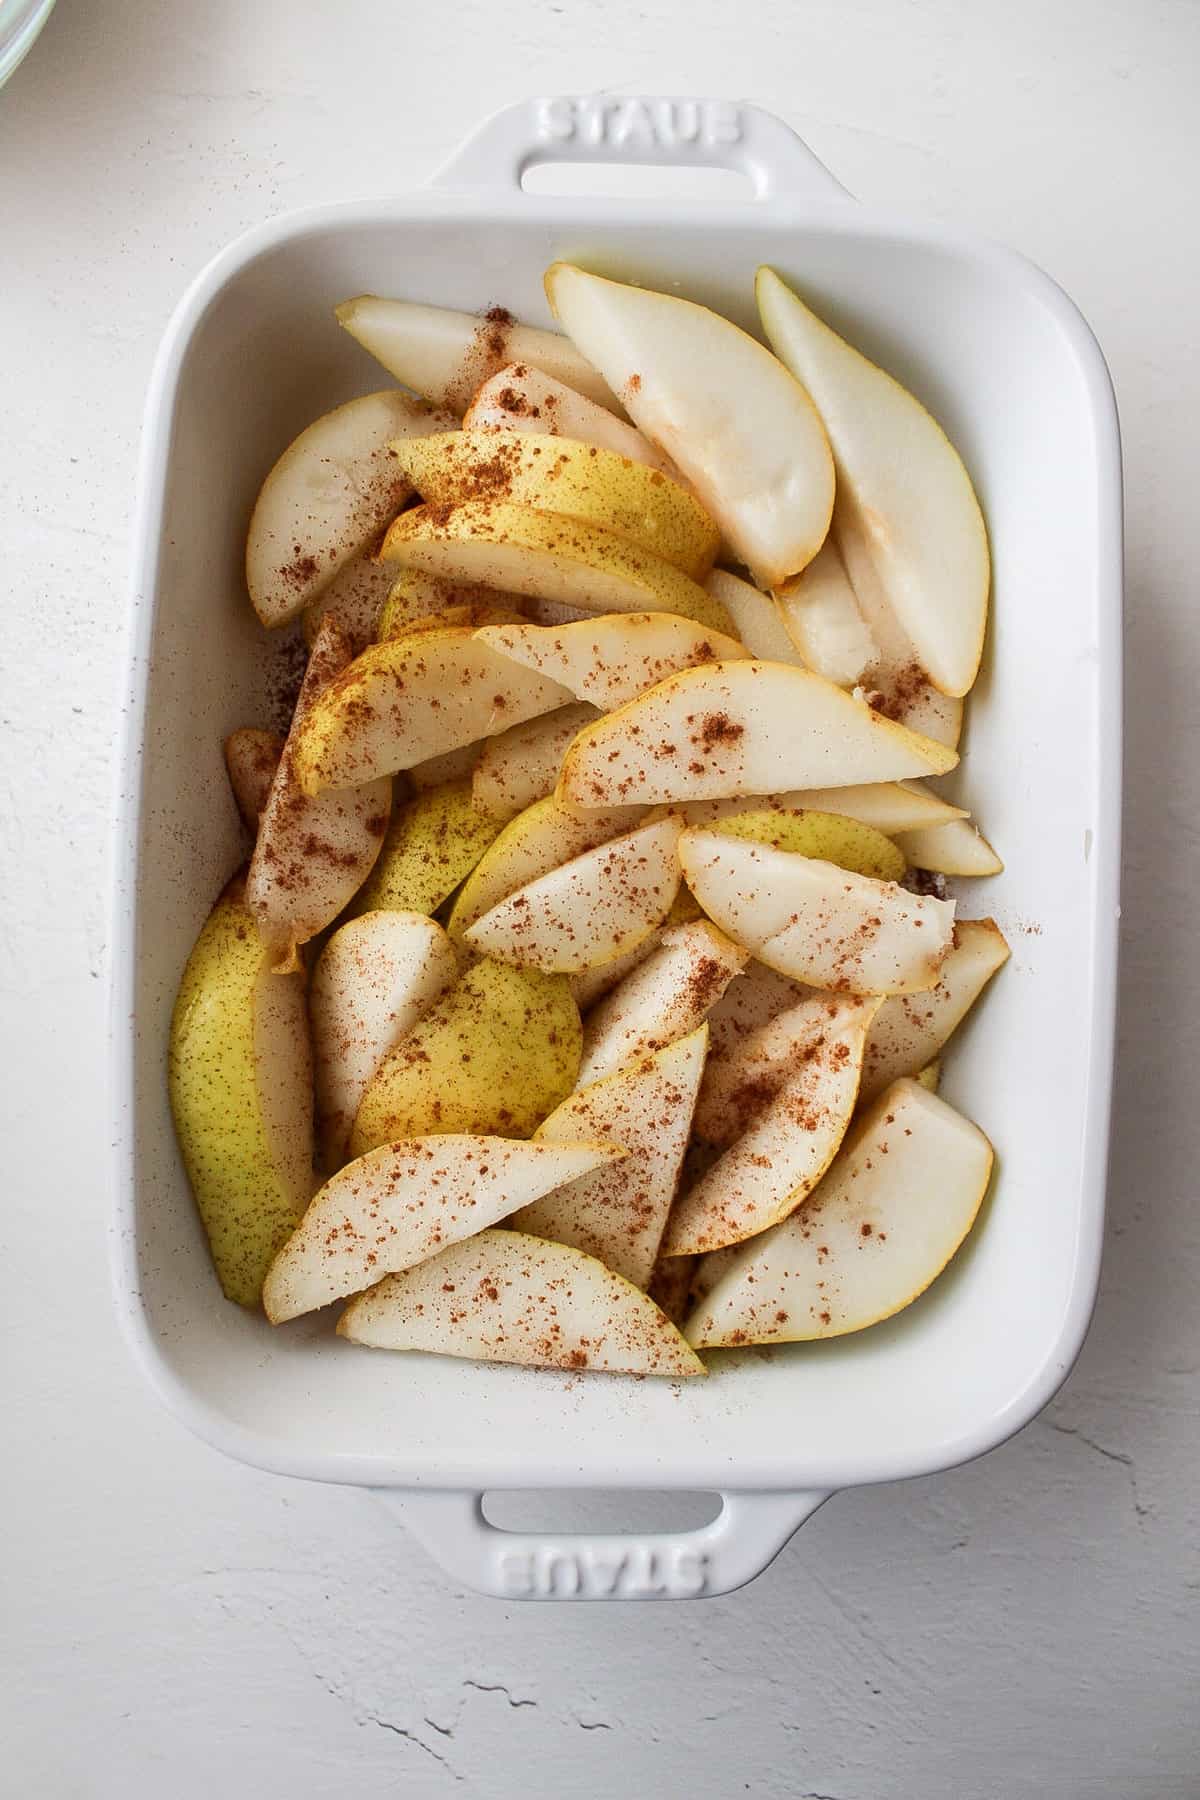 sliced pears in a baking dish with cinnamon